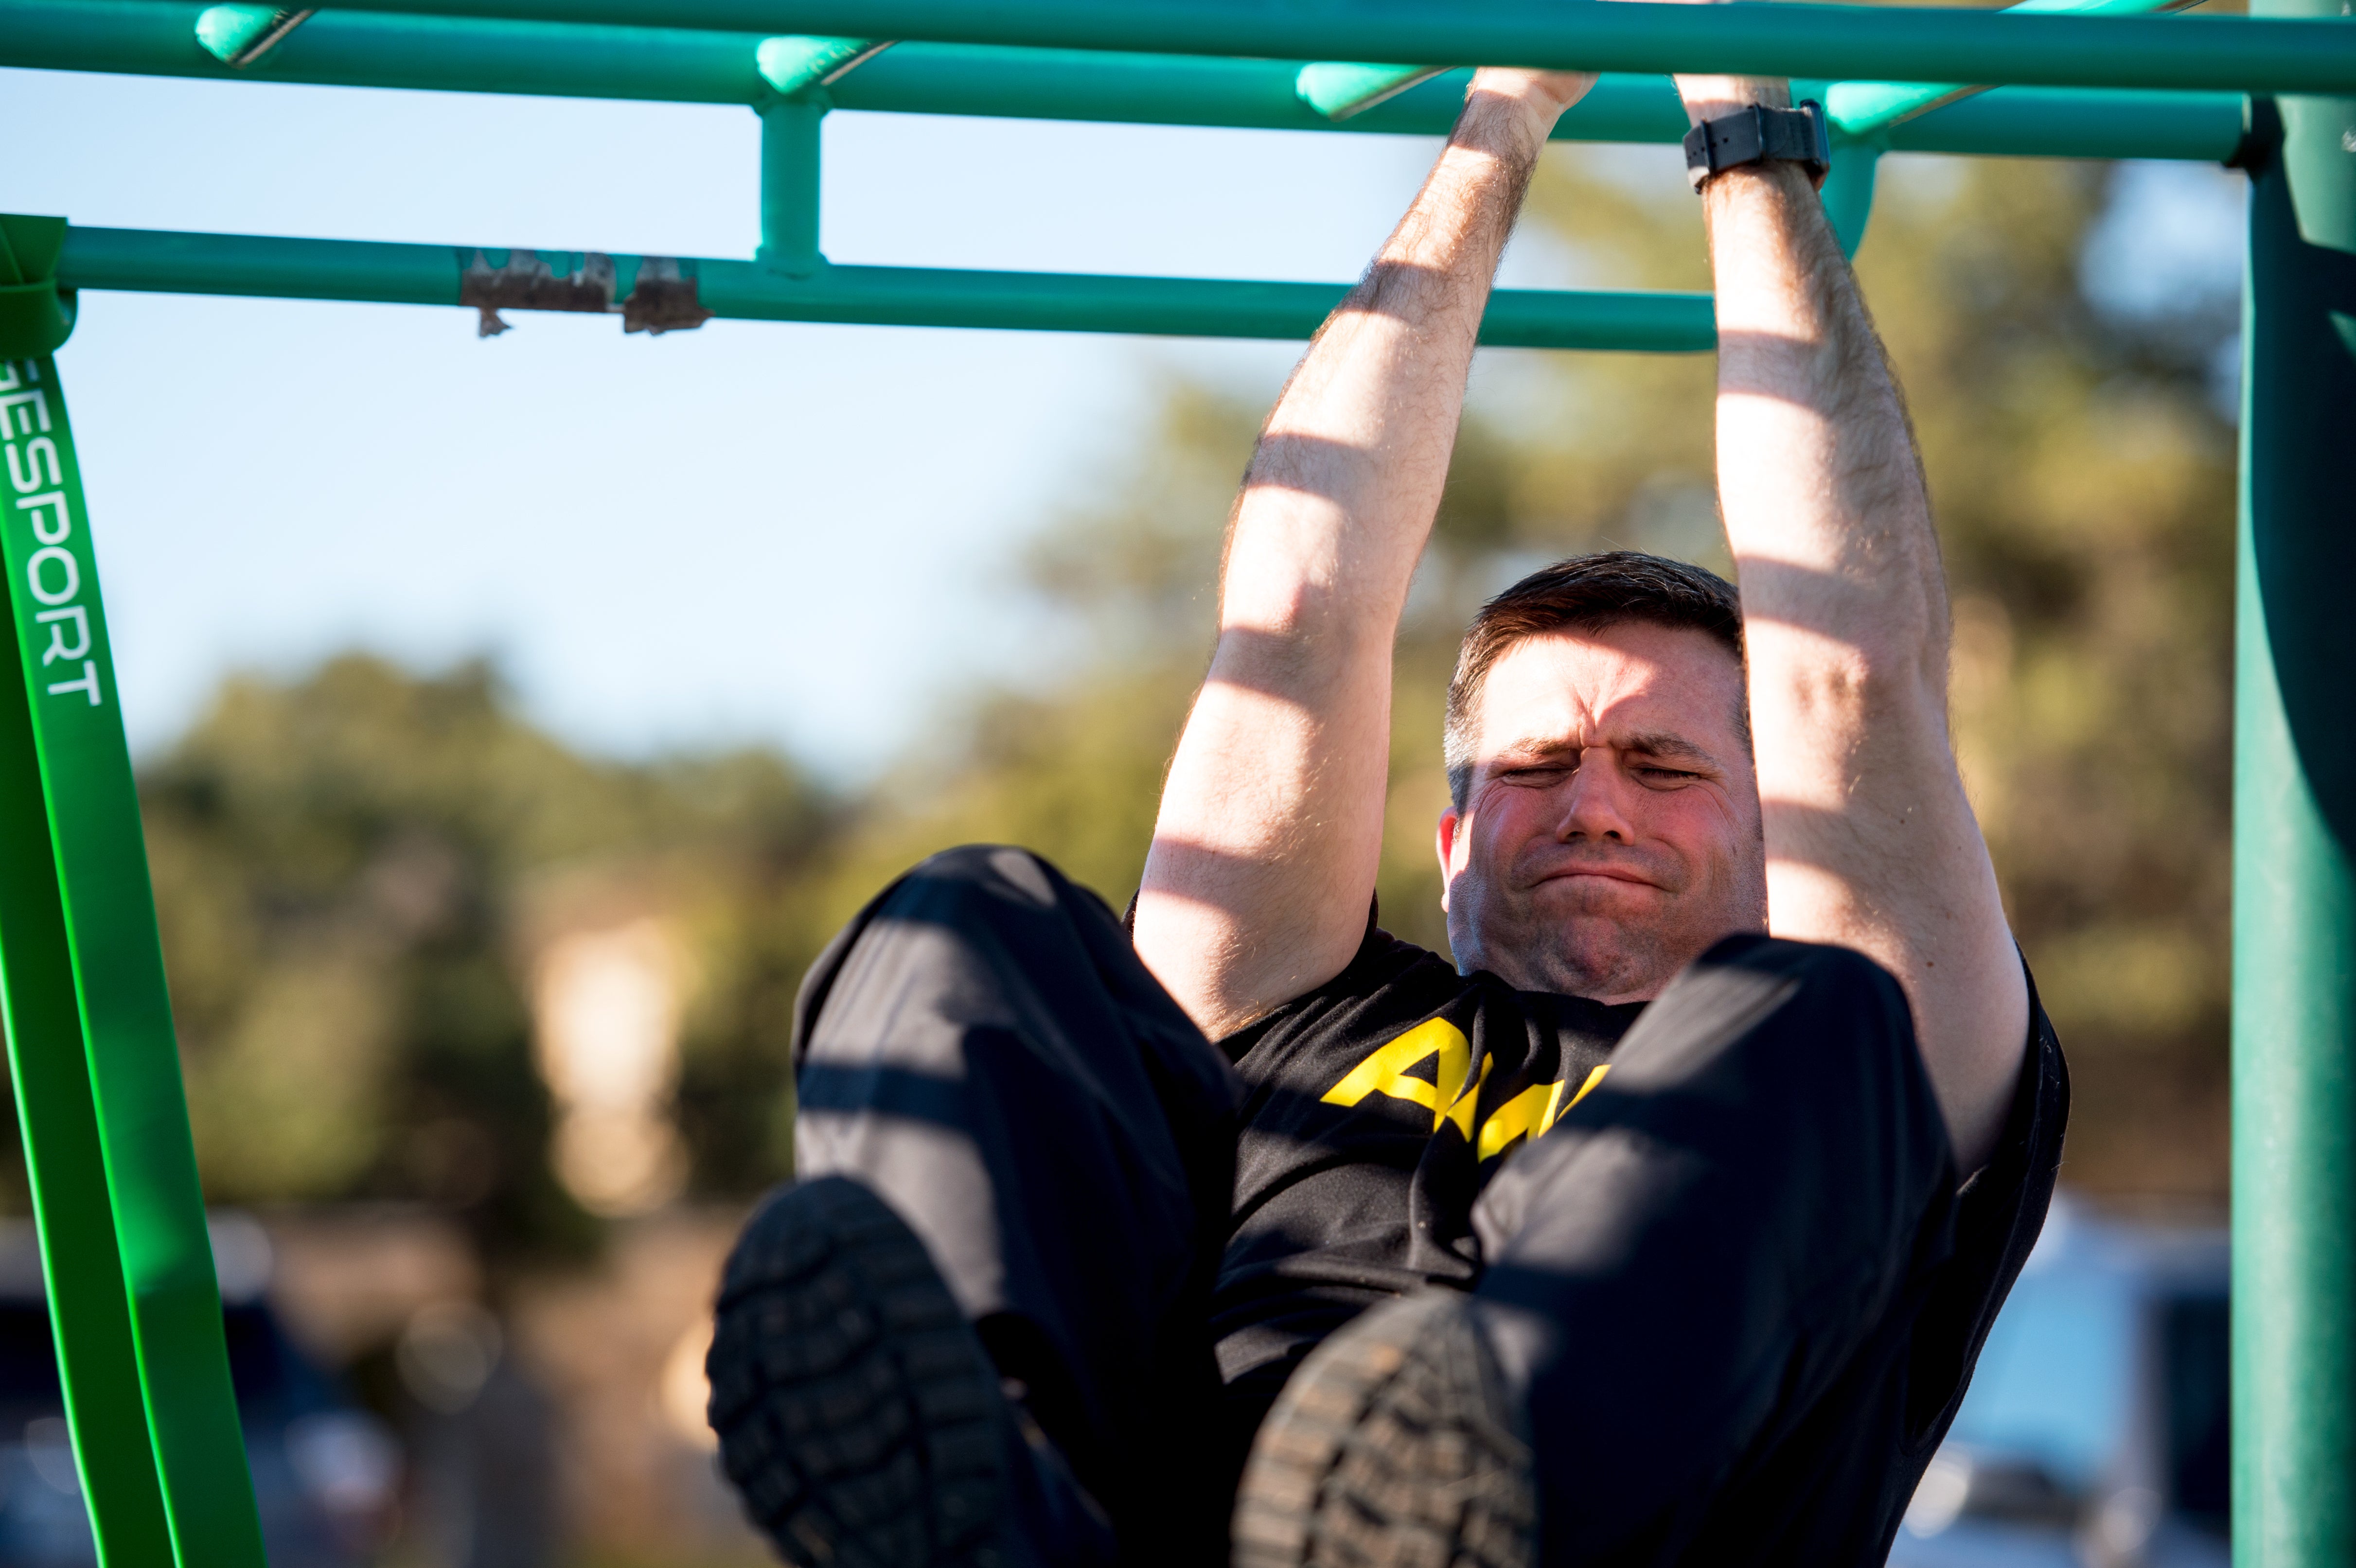 Lawmakers are mad about the Army’s new fitness test and think the leg tuck is useless